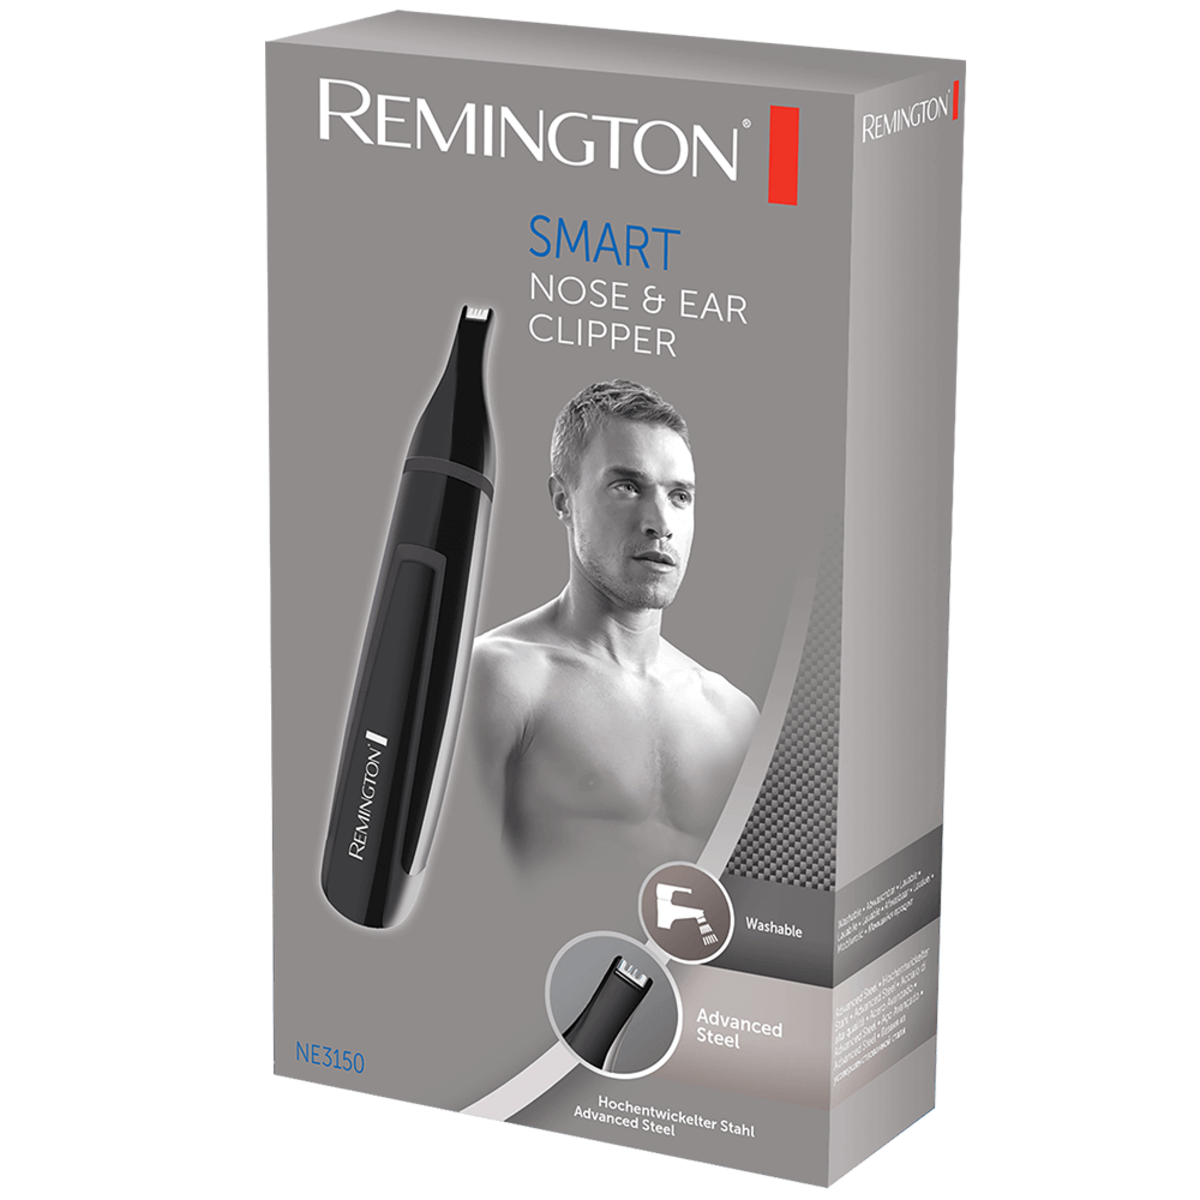 REMINGTON NE3150-Nose And Ear Hair Trimmer-Smart